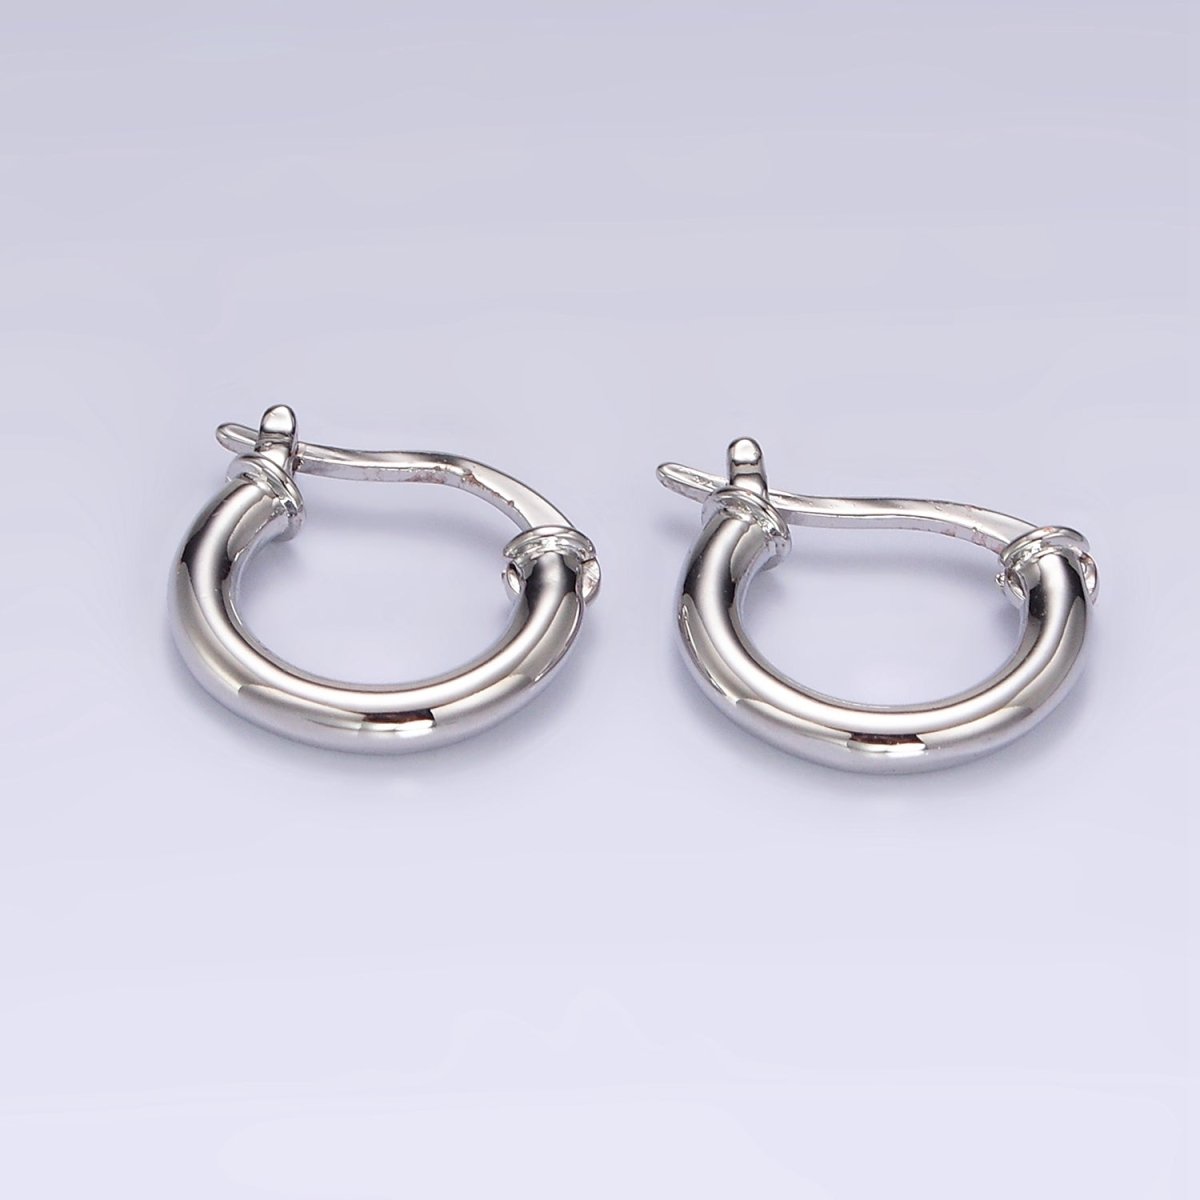 14K Gold Filled 12mm Tube Minimalist French Latch Hoop Earrings in Gold & Silver | AE116 AE117 - DLUXCA